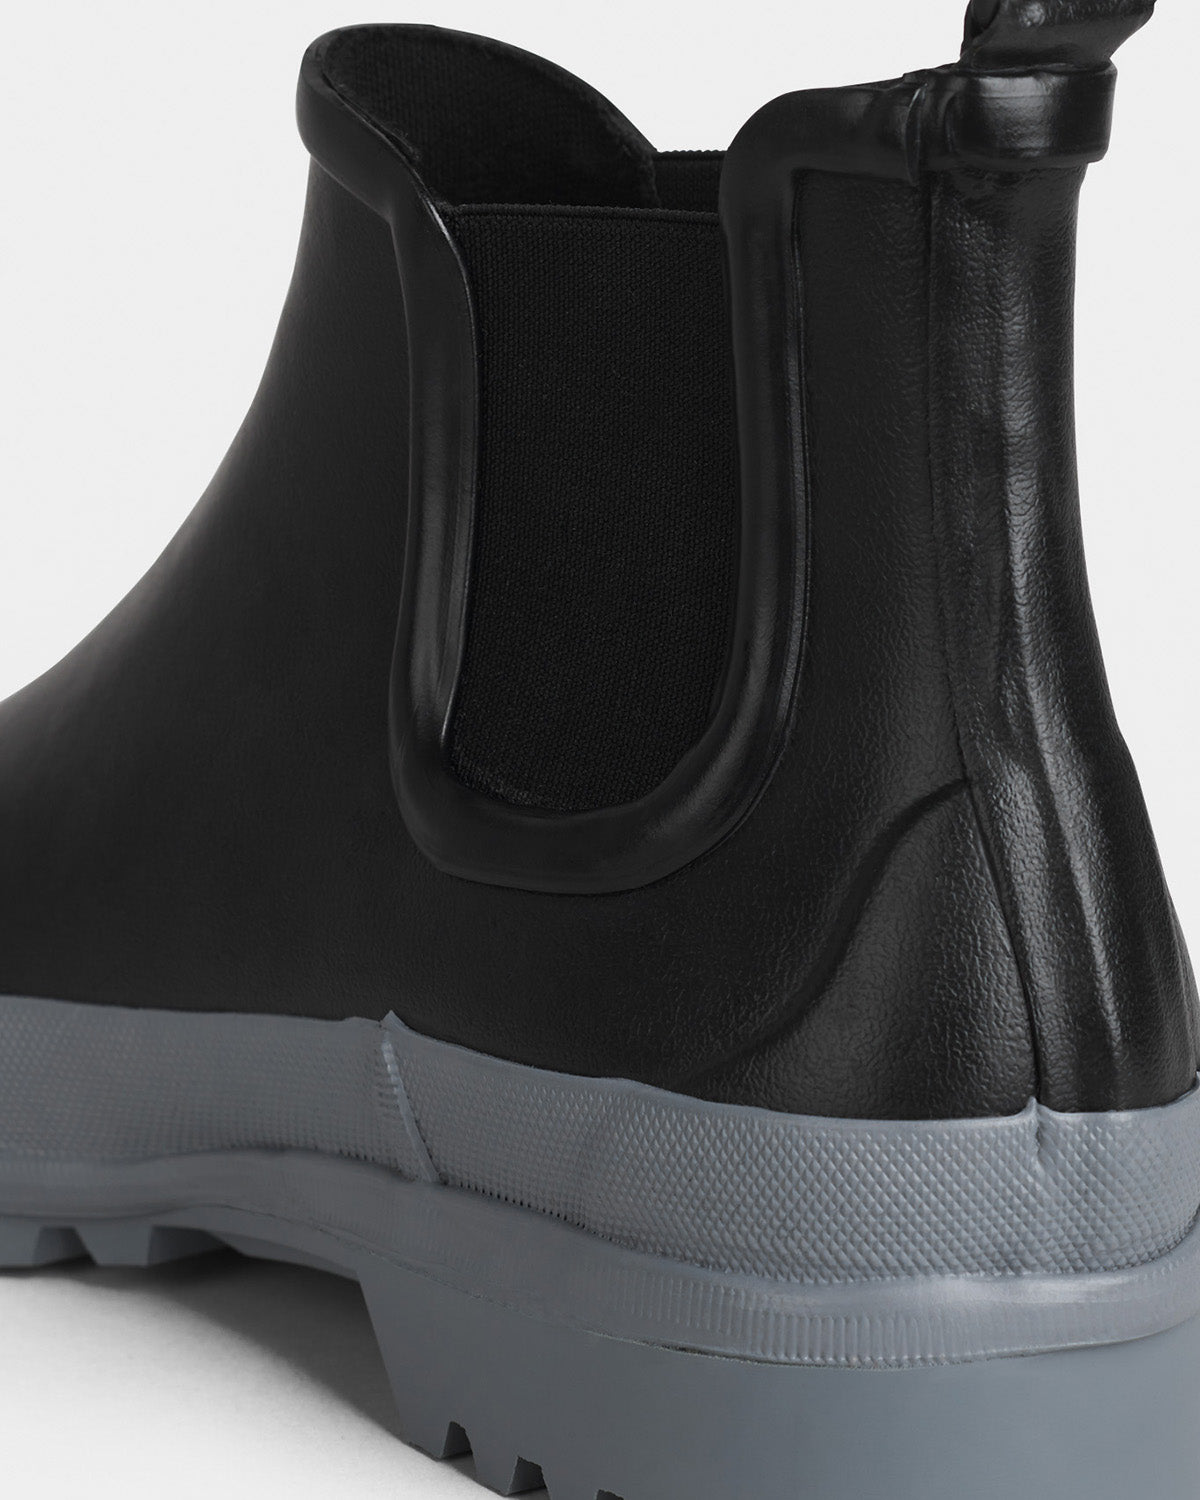 Chelsea Rainboots in color black with grey sole by Ilse Jacobsen